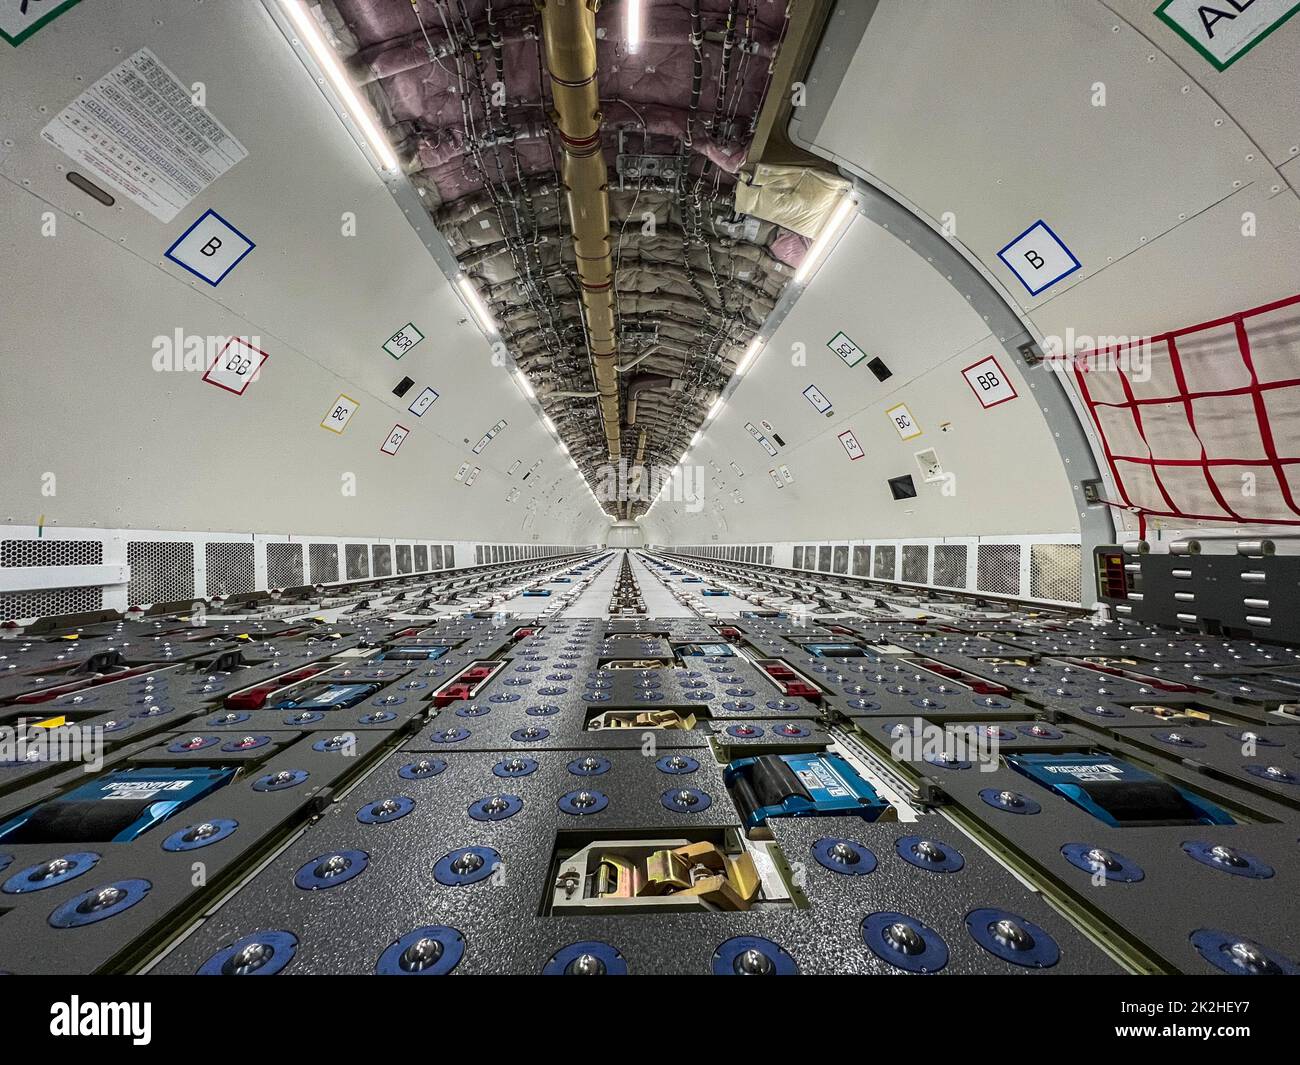 Cargo Airplane - view inside the main deck cargo compartment on a freshly converted wide-body freighter aircraft Stock Photo